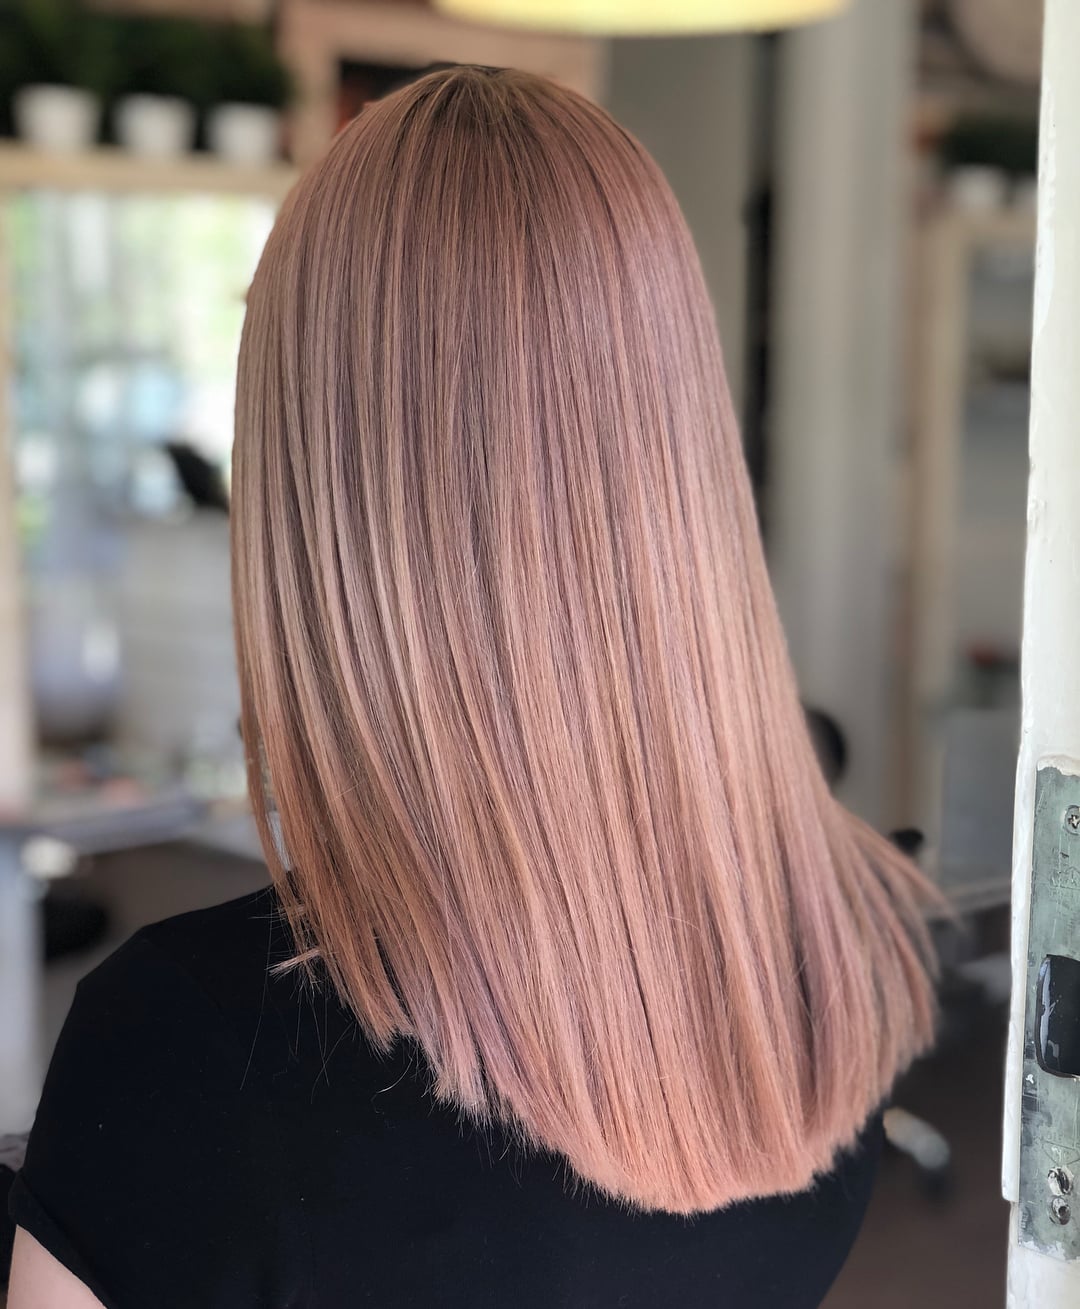 Dusty Pink Hair Color